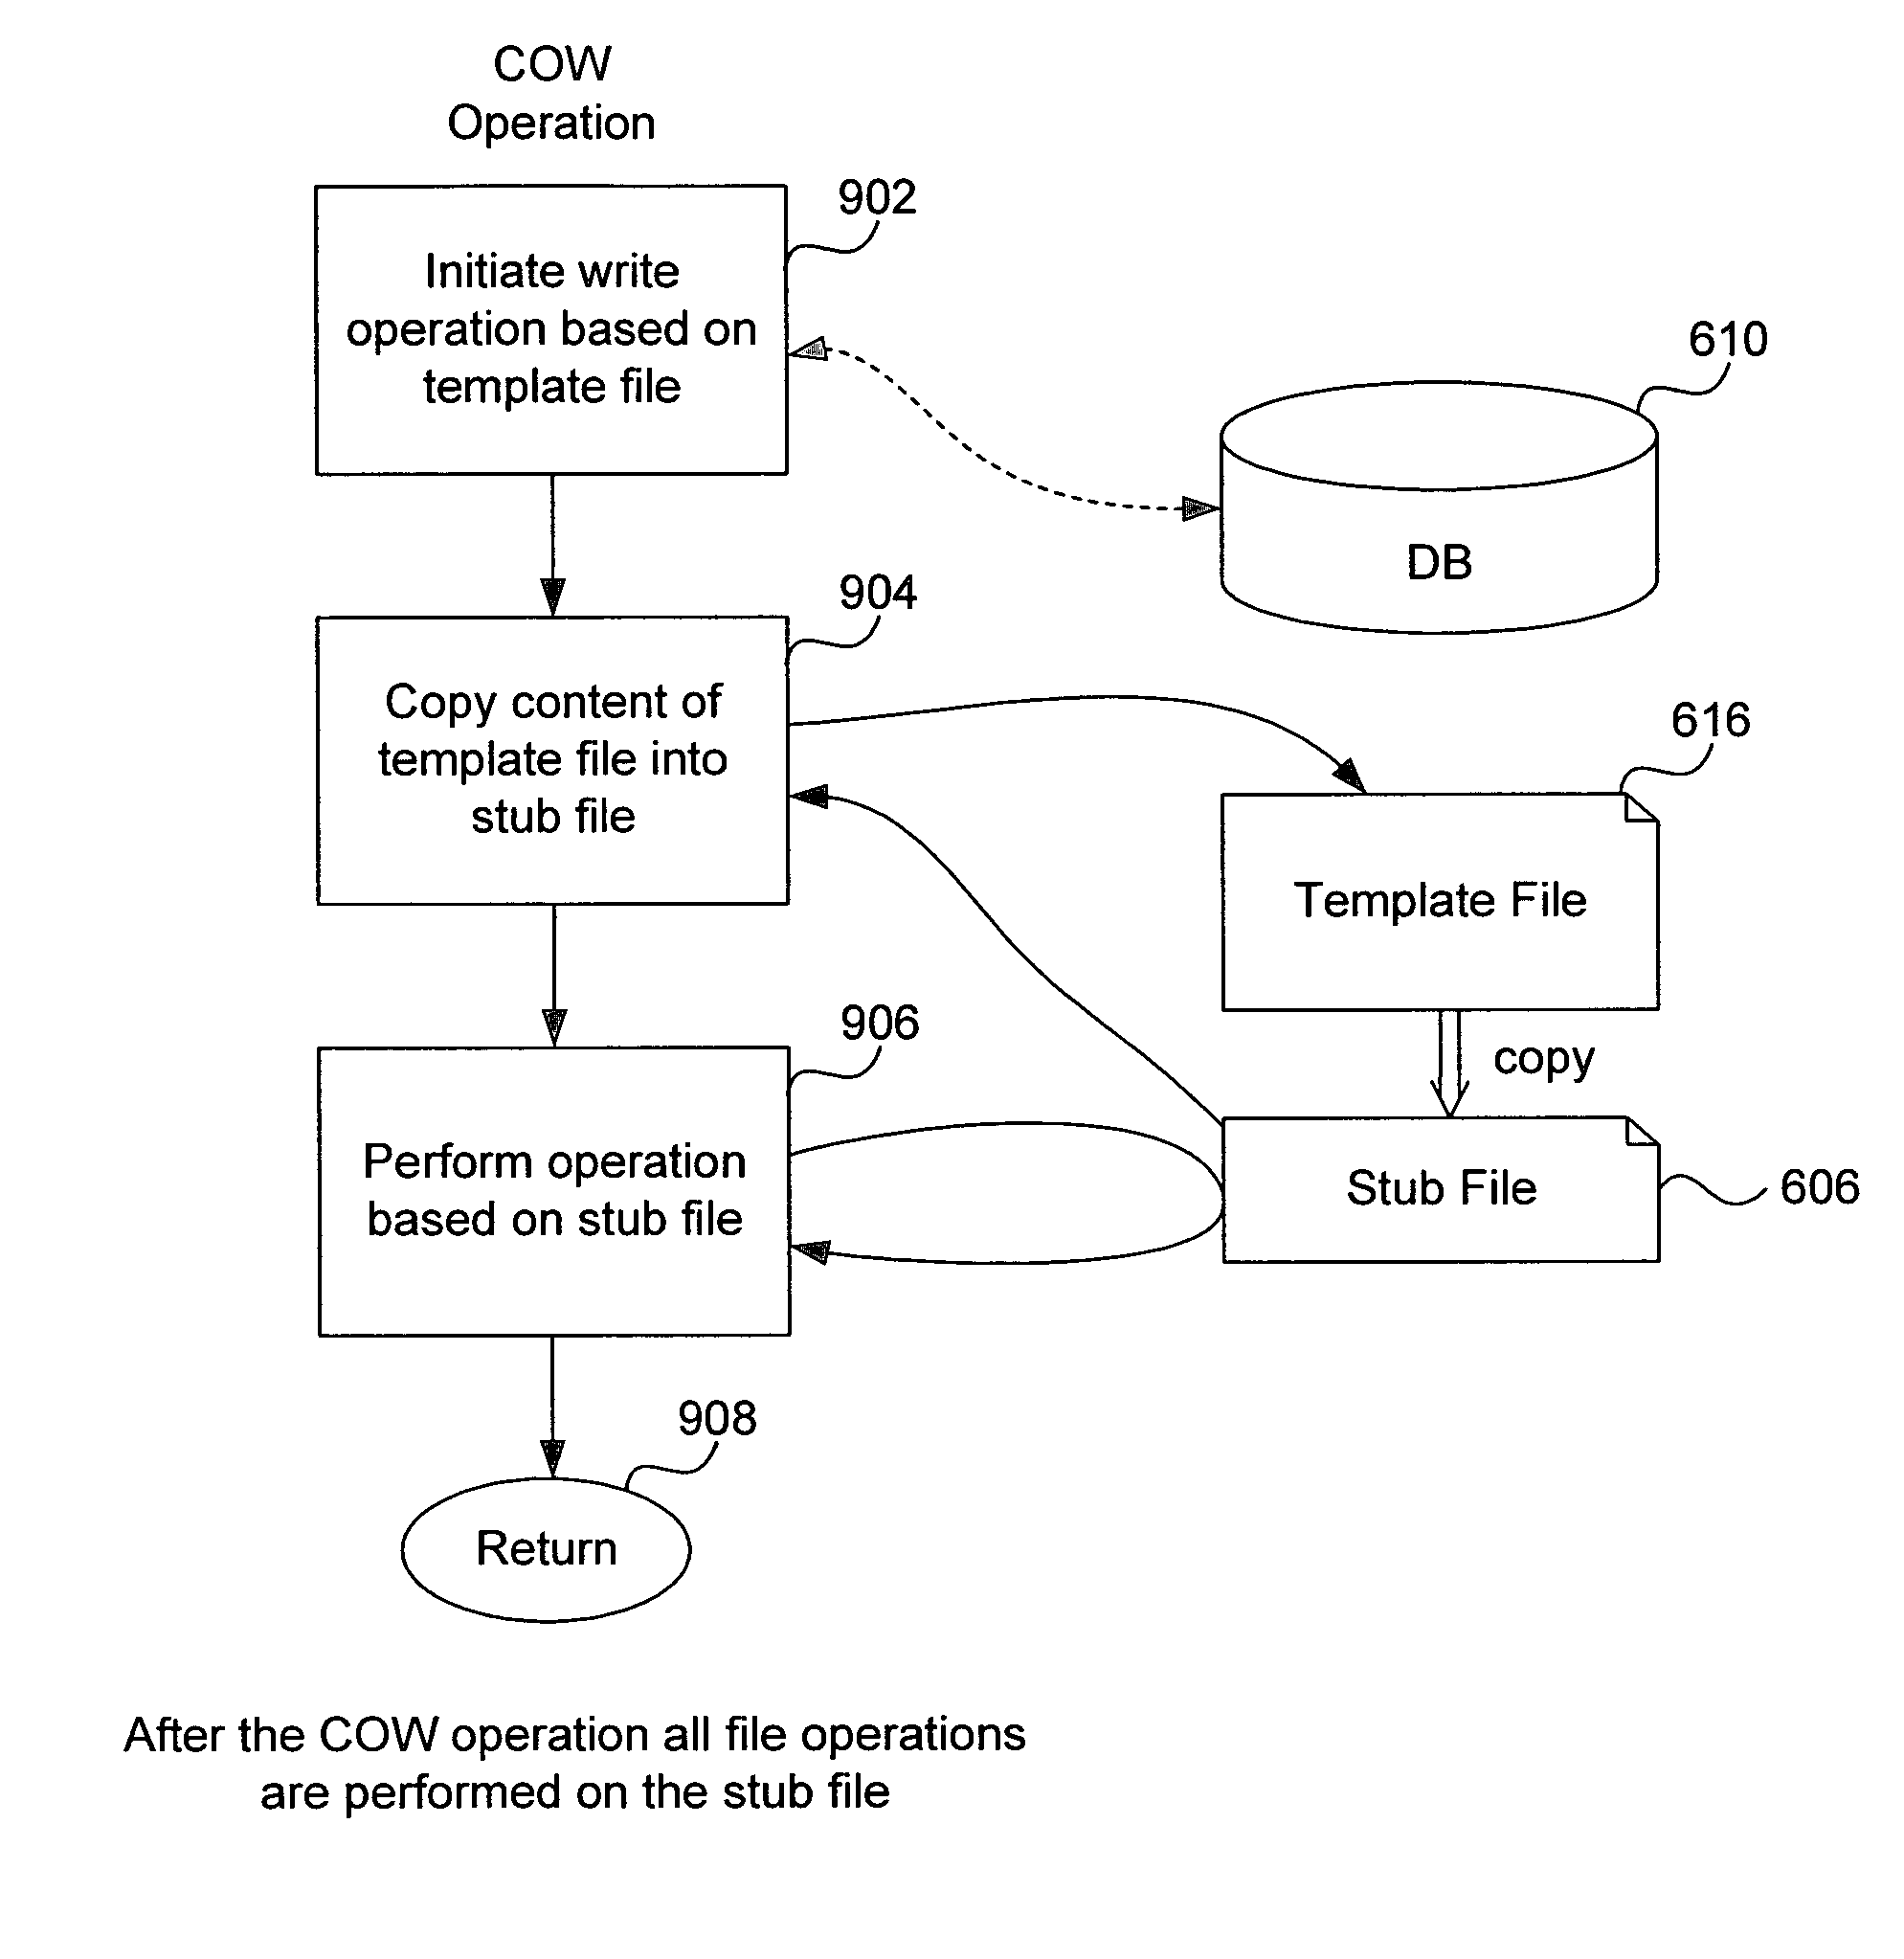 System, method and computer program product for multi-level file-sharing by concurrent users